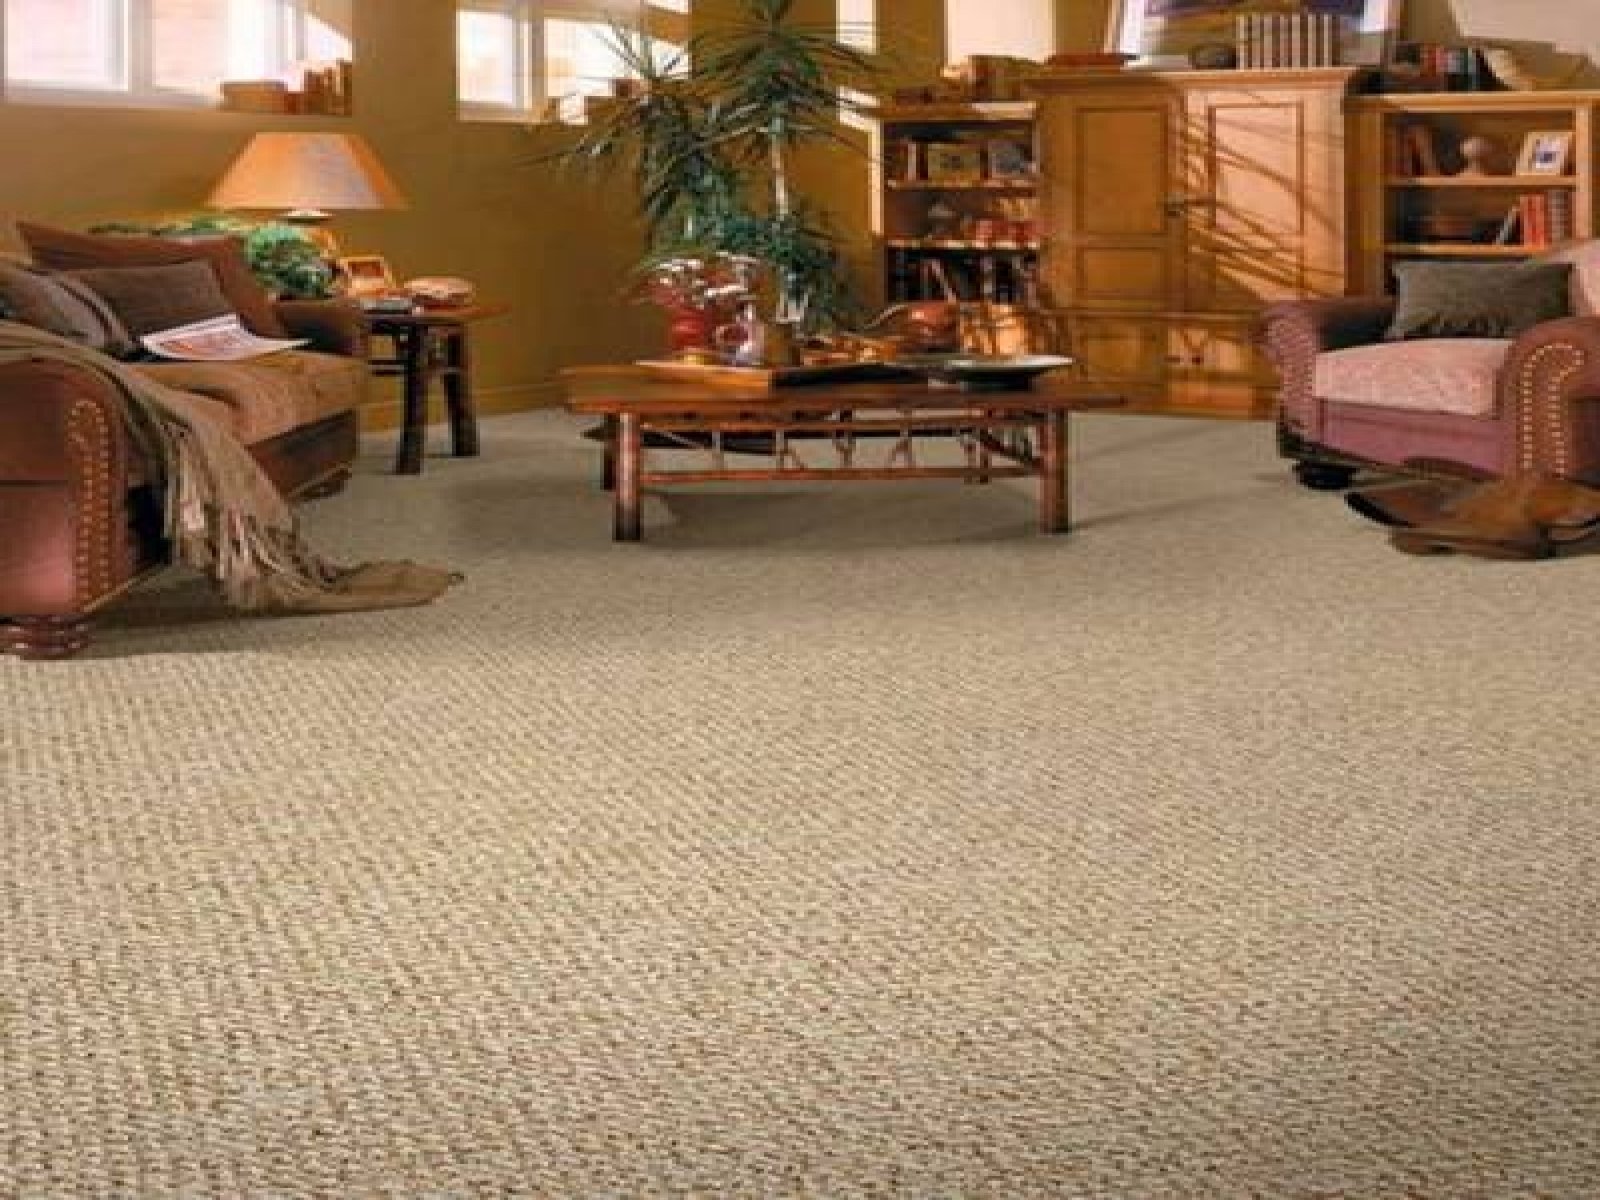 Living Room Wall-To-Wall Carpet Ideas